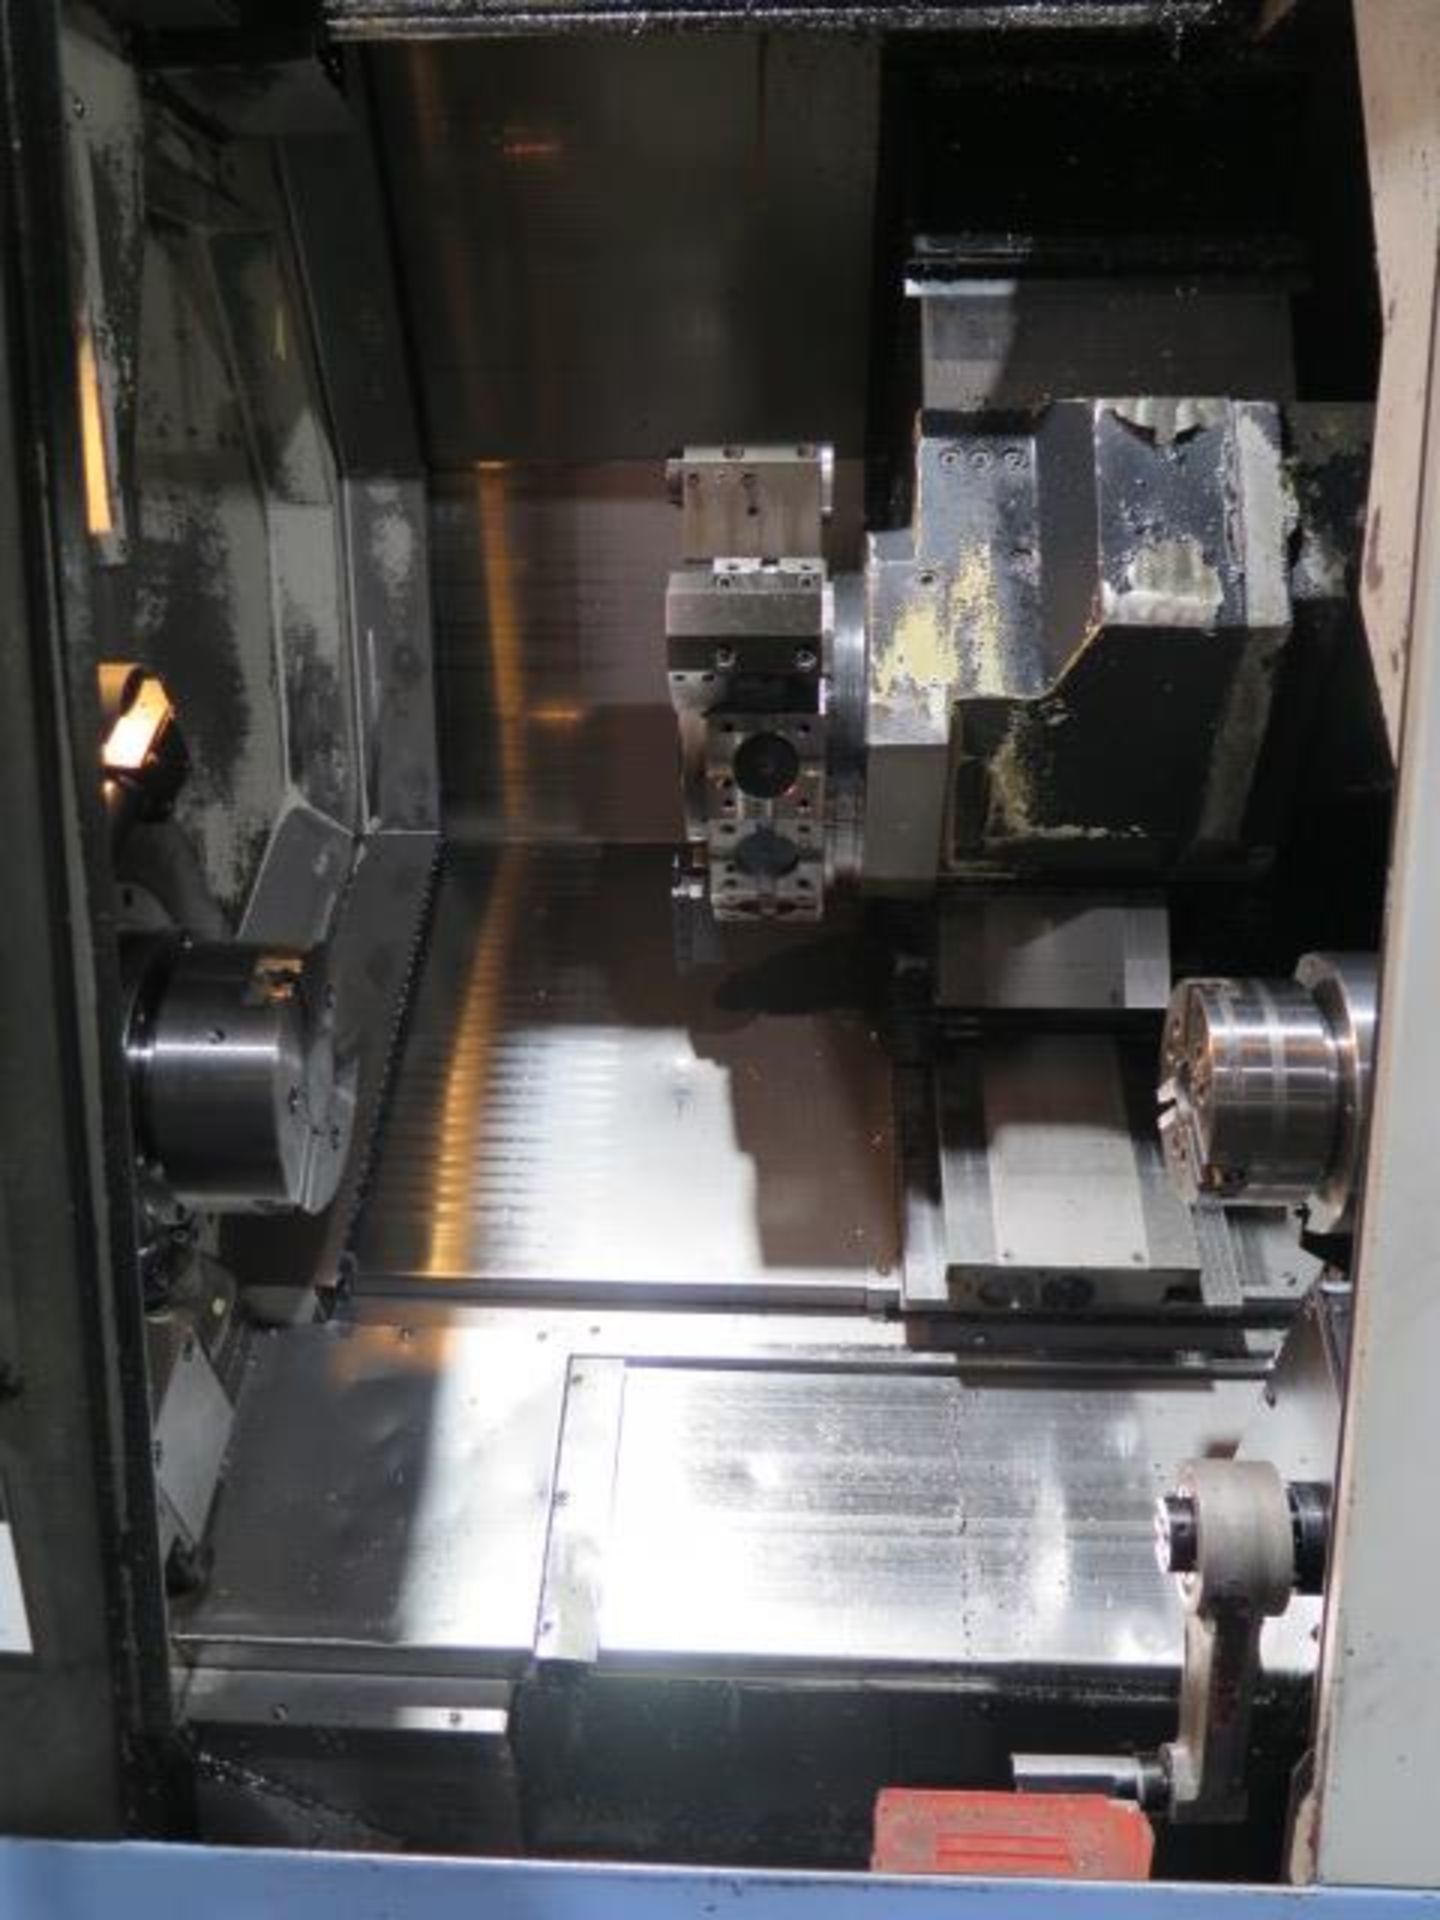 2007 Doosan PUMA 2000SY Twin Spindle CNC Turning Center s/n P200SY0835 w/ Fanuc 18i-TB, SOLD AS IS - Image 4 of 21